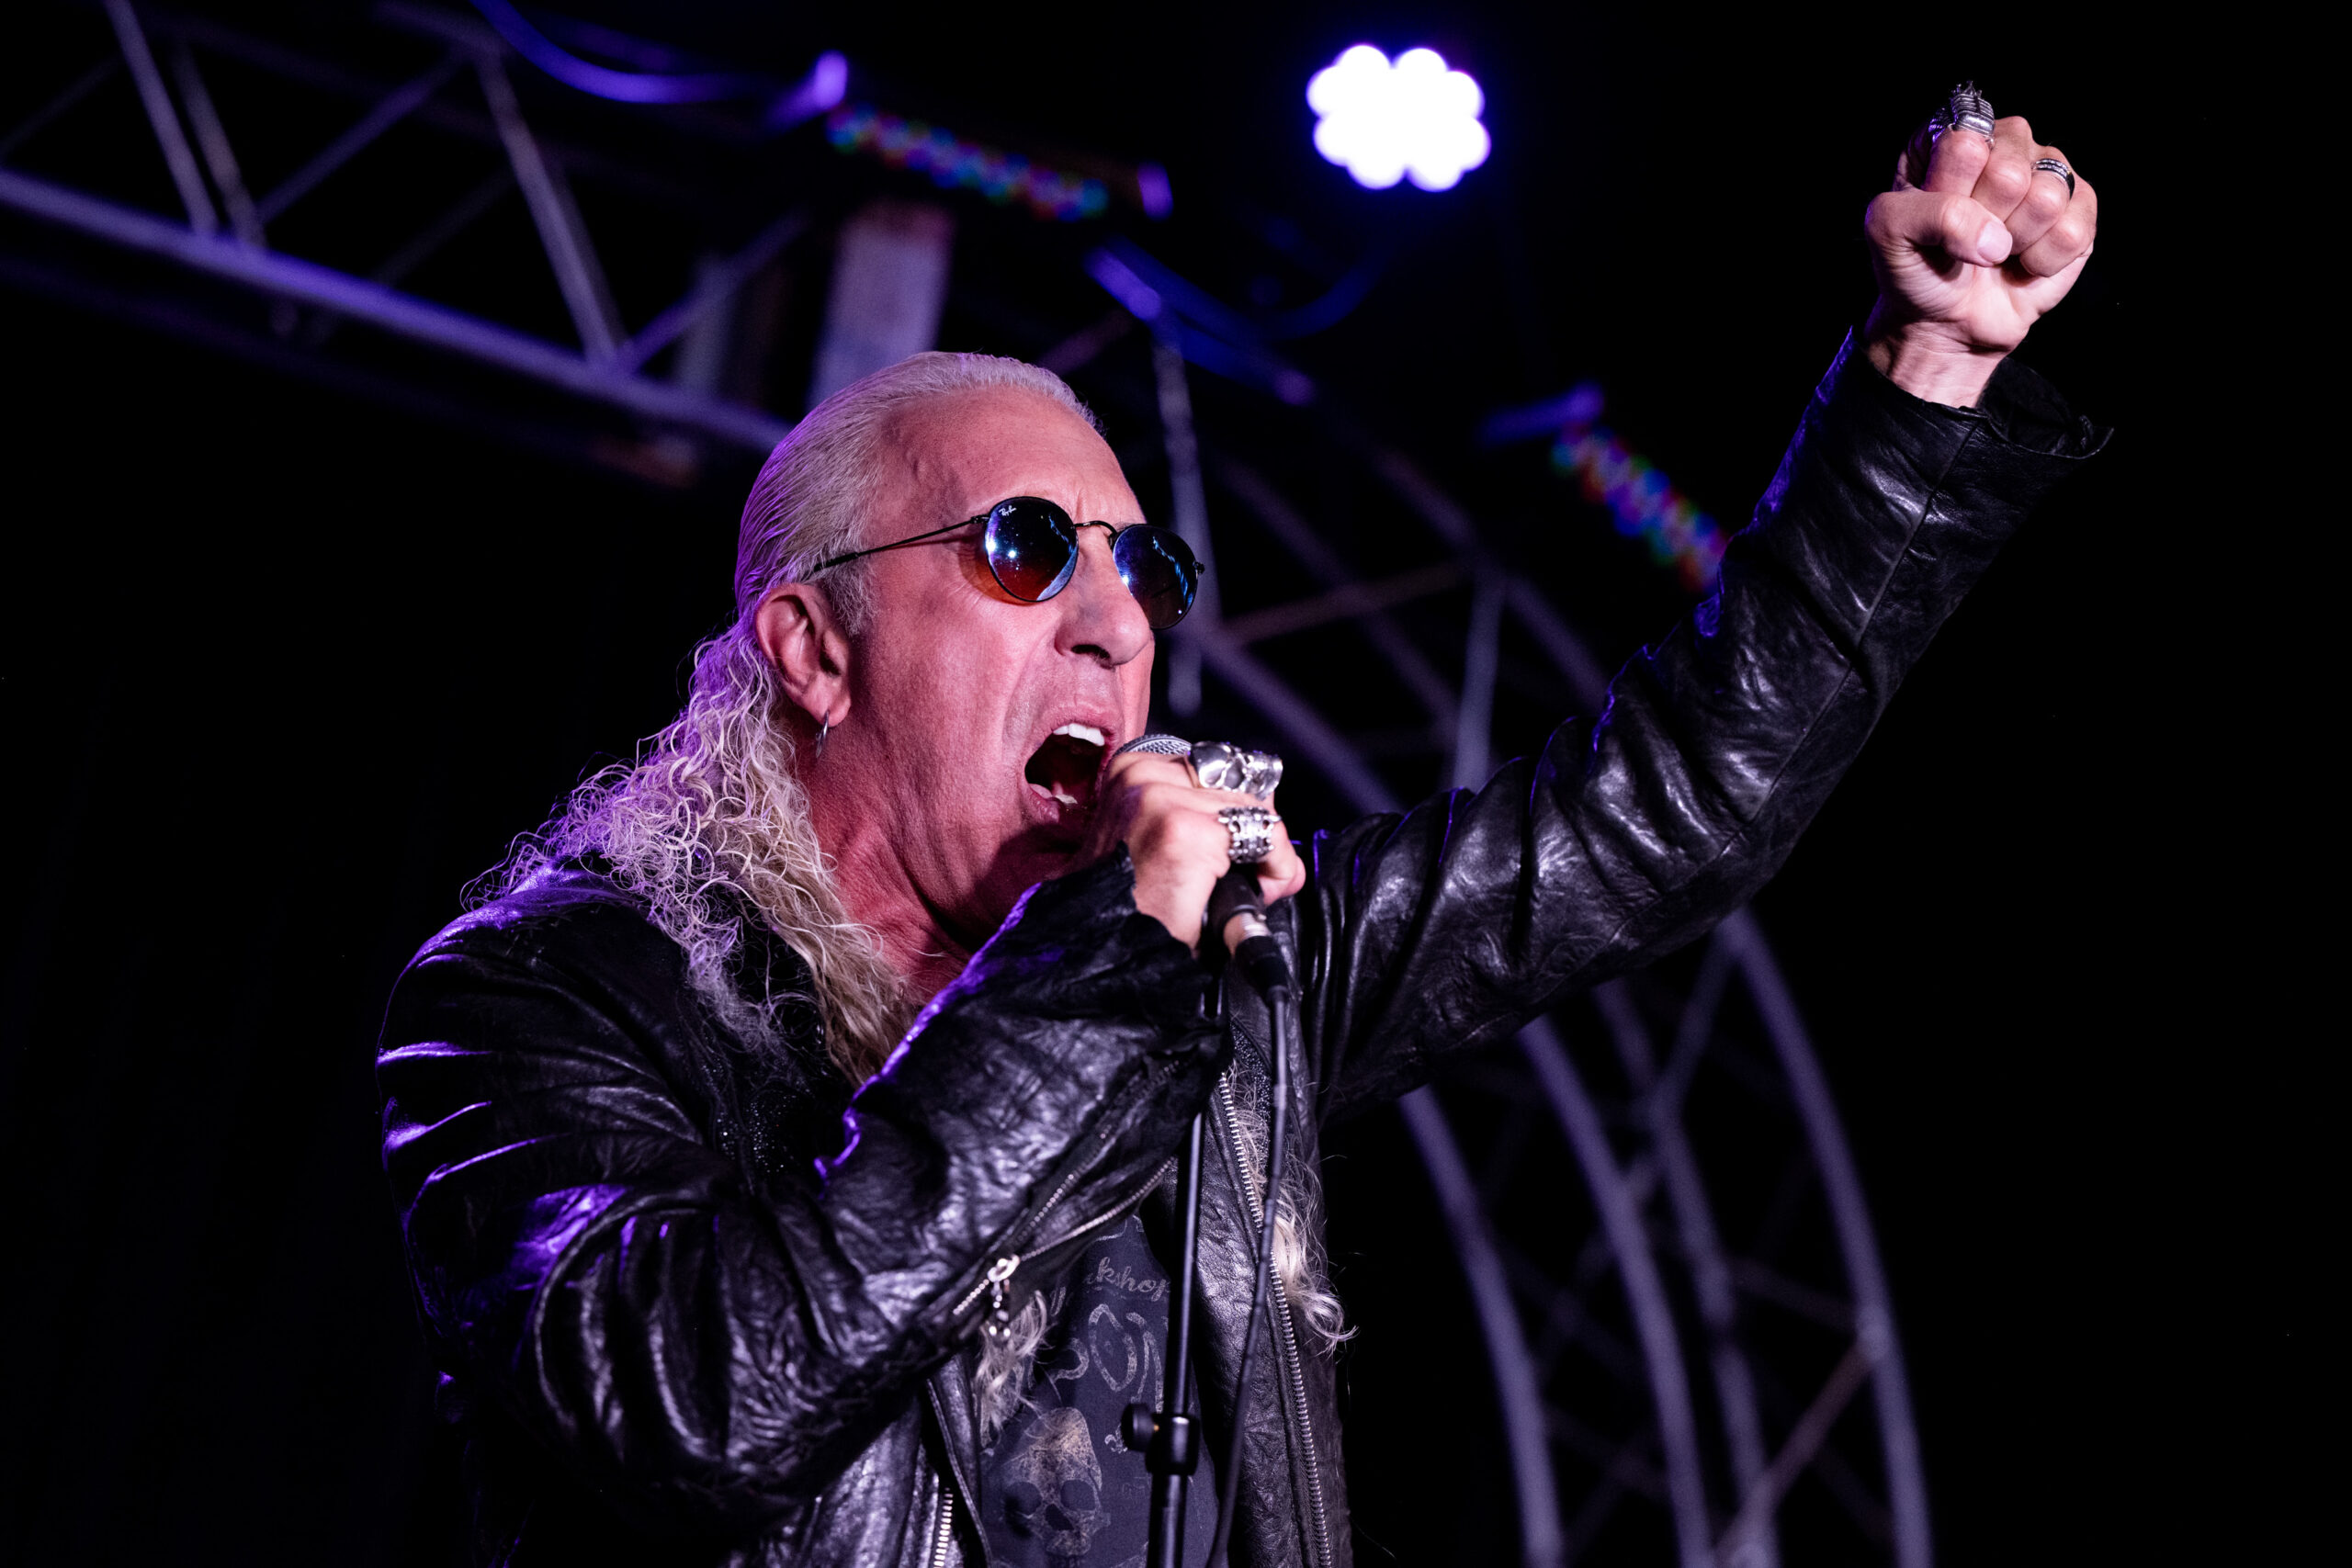 ‘Well Said’: ’80s Glam Rocker Dee Snider Backs KISS Star’s Controversial Statement Against Normalizing Child Sex Changes